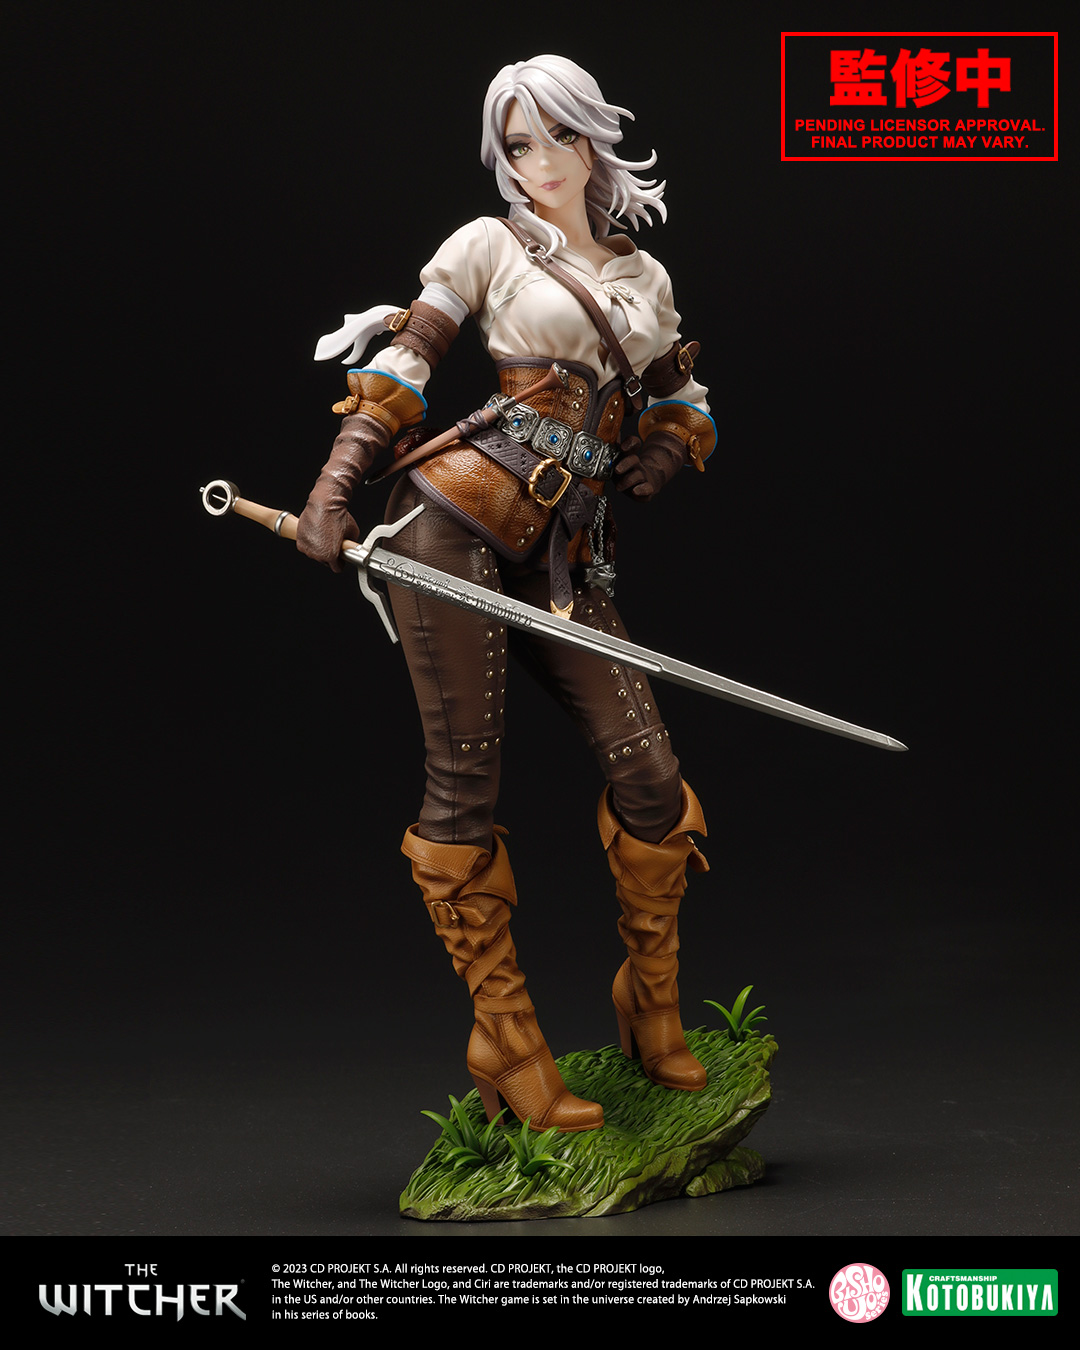 The Witcher Bishoujo Ciri Painted Prototype Unveiled